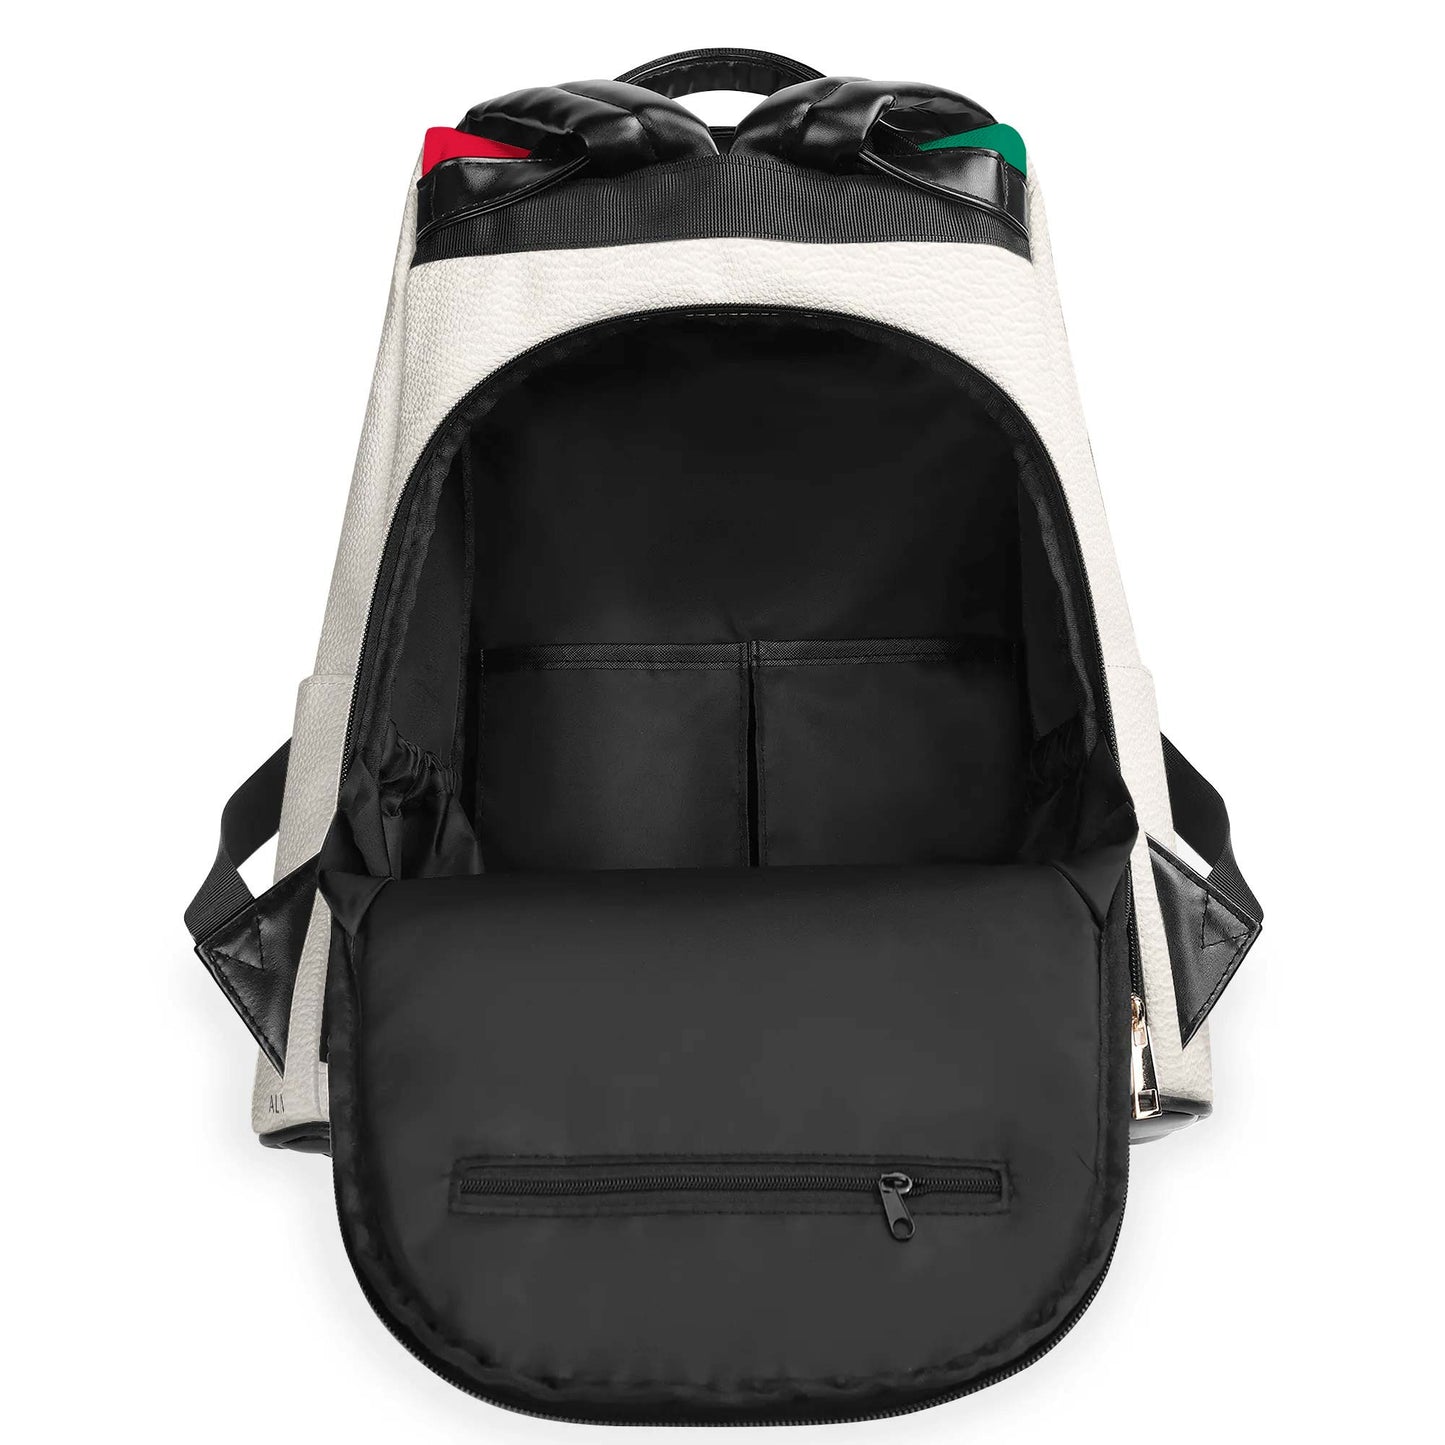 It's In My DNA - Personalized Leather BackPack - BP_MX11